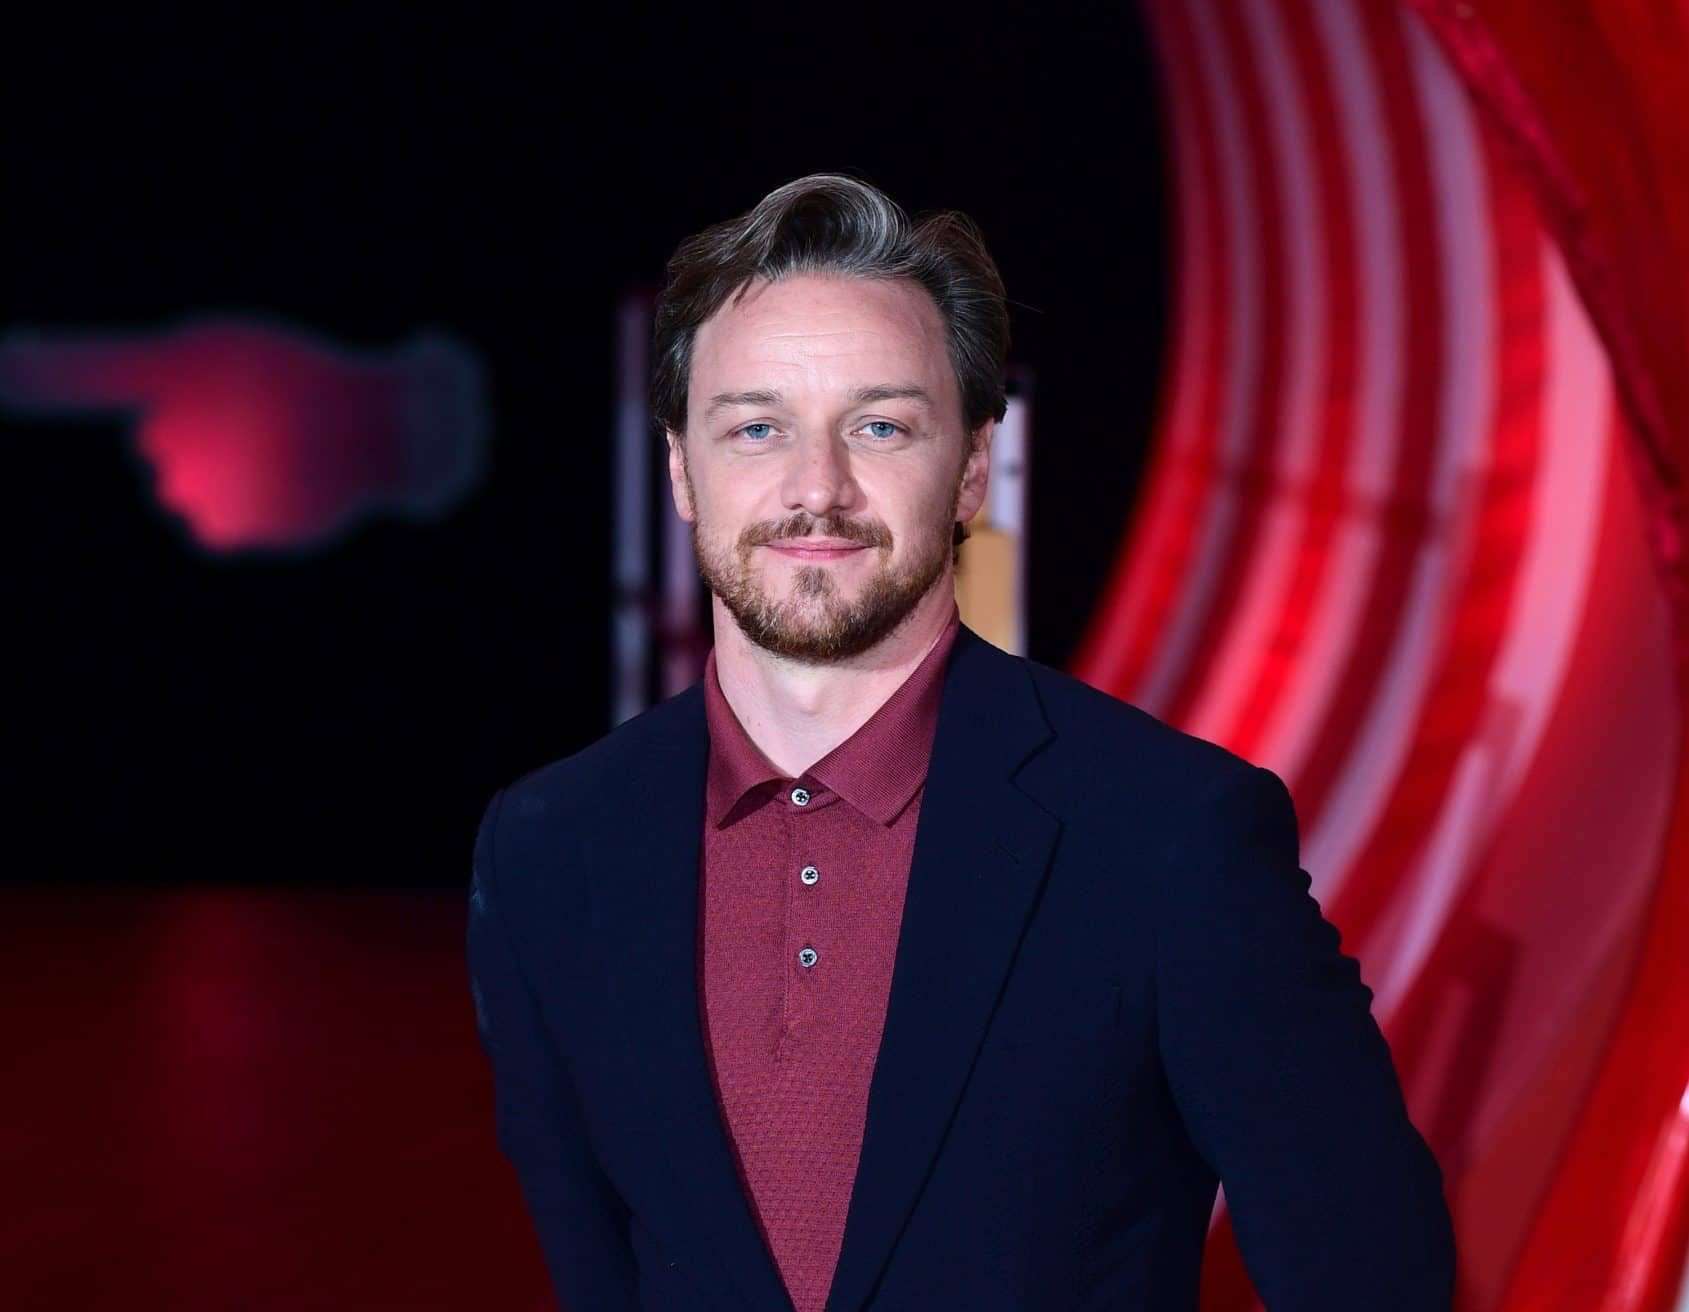 James McAvoy donates £275,000 for protective equipment for NHS workers